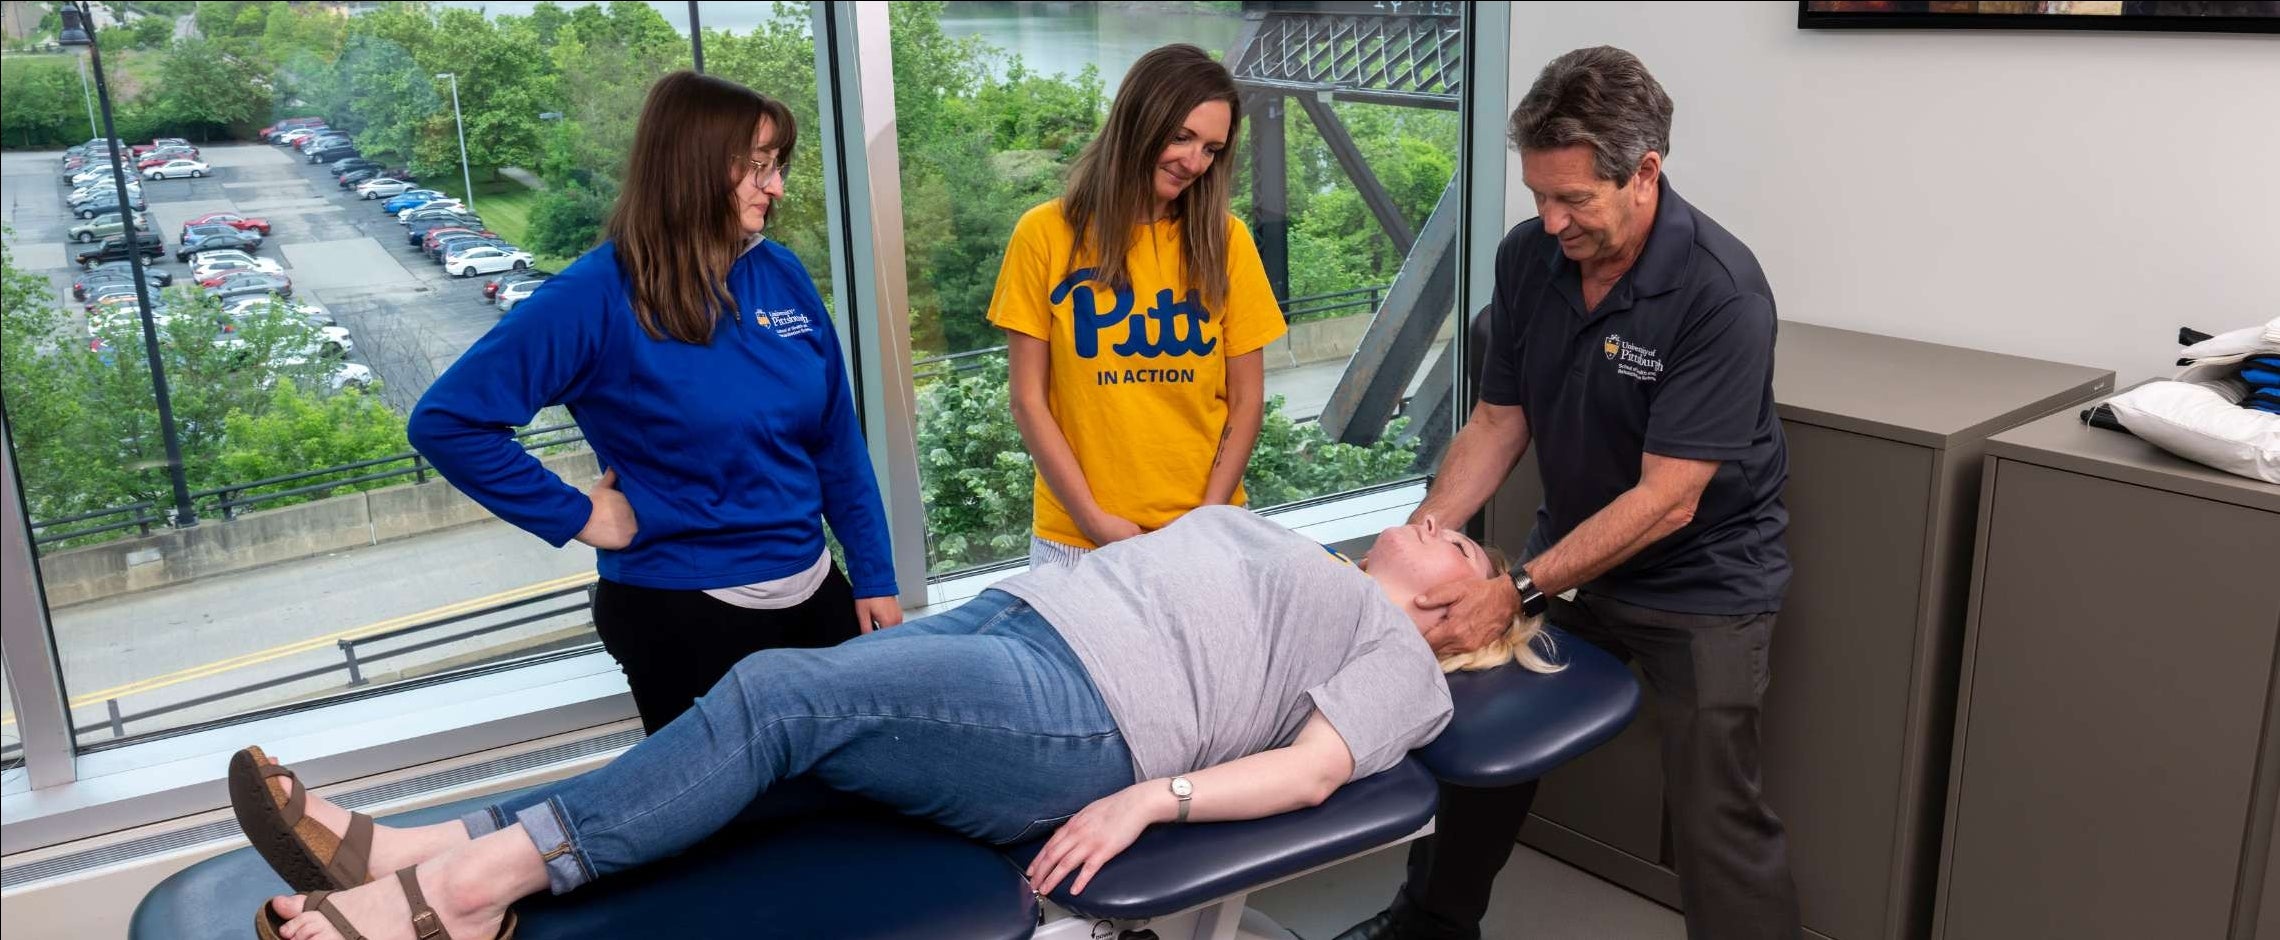 Students observing a patient model on a medical table while professor is demonstrating an adjustment.